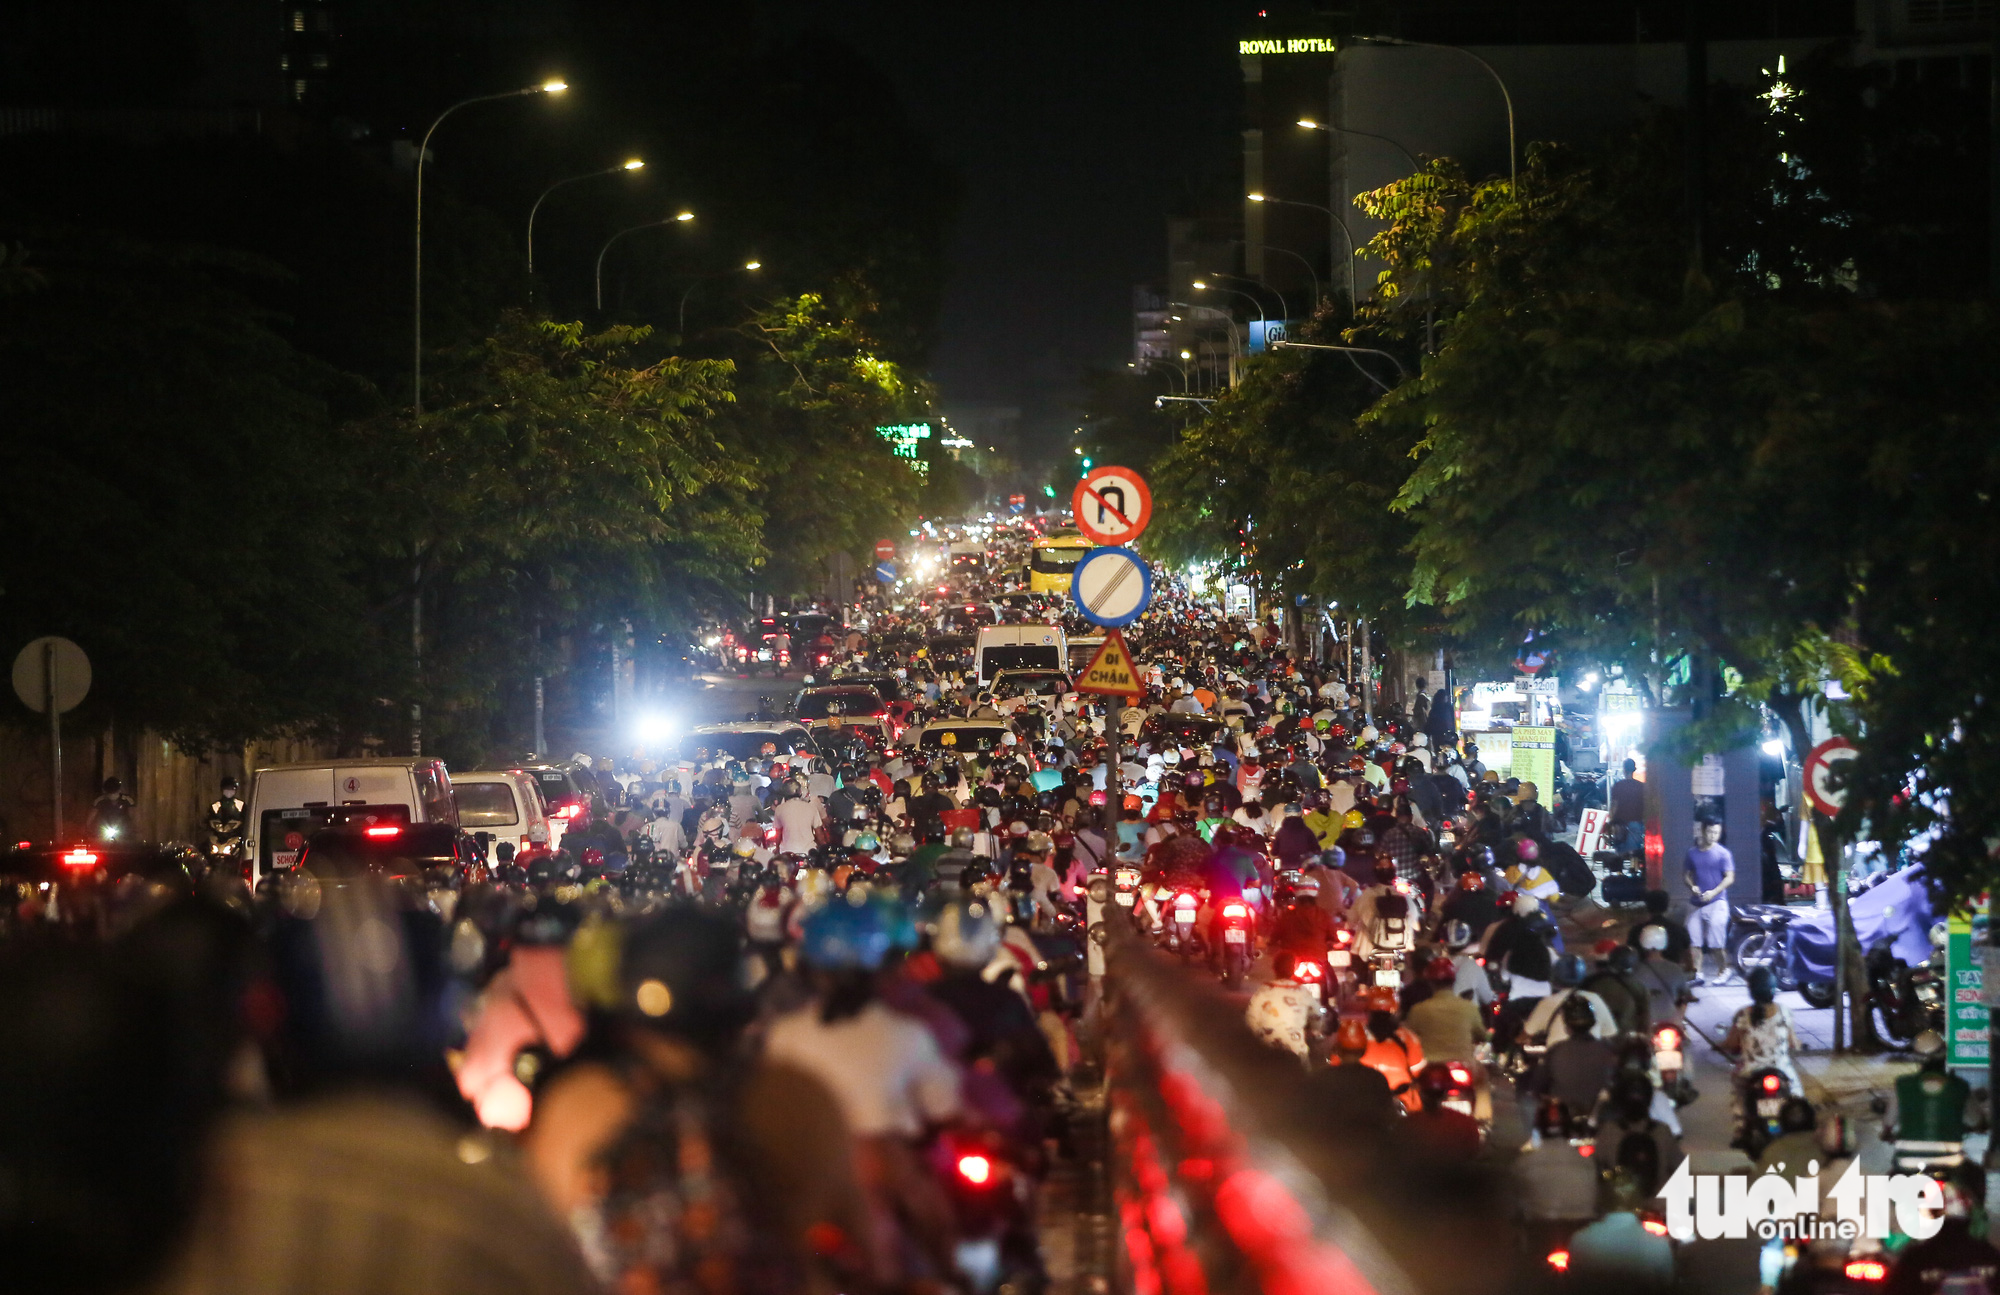 Congestion often occurs at the intersection of Nguyen Thai Son and Pham Ngu Lao Streets in Go Vap District, Ho Chi Minh City. Photo: Chau Tuan / Tuoi Tre